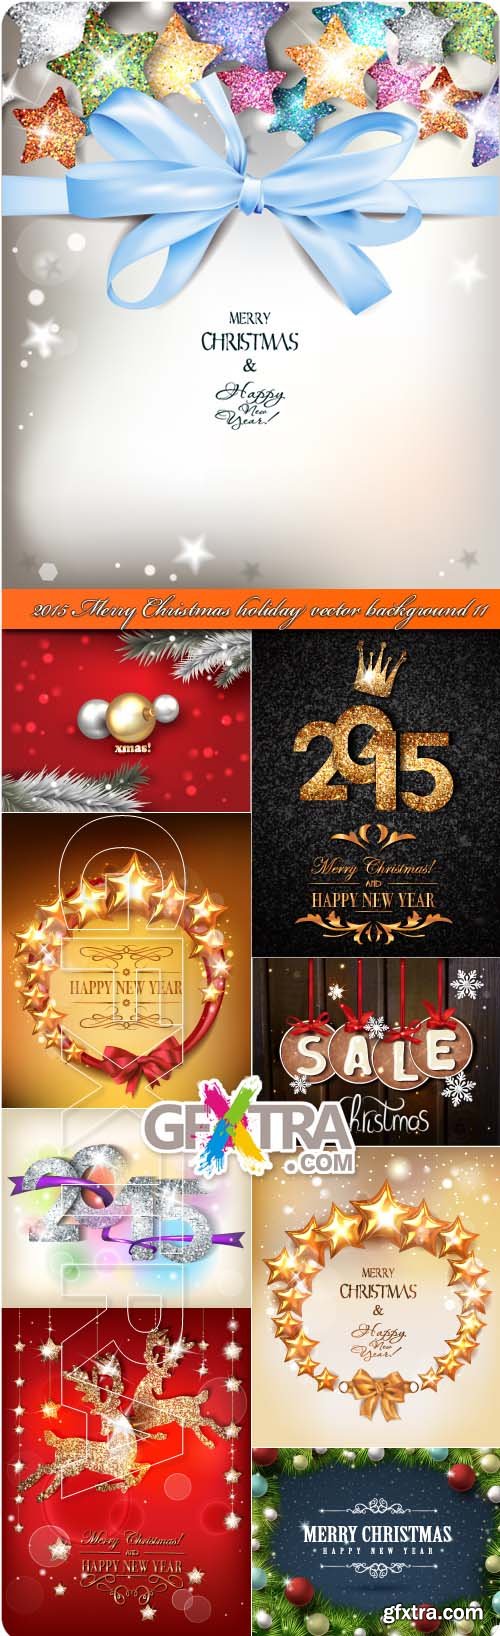 2015 Merry Christmas holiday vector background 11